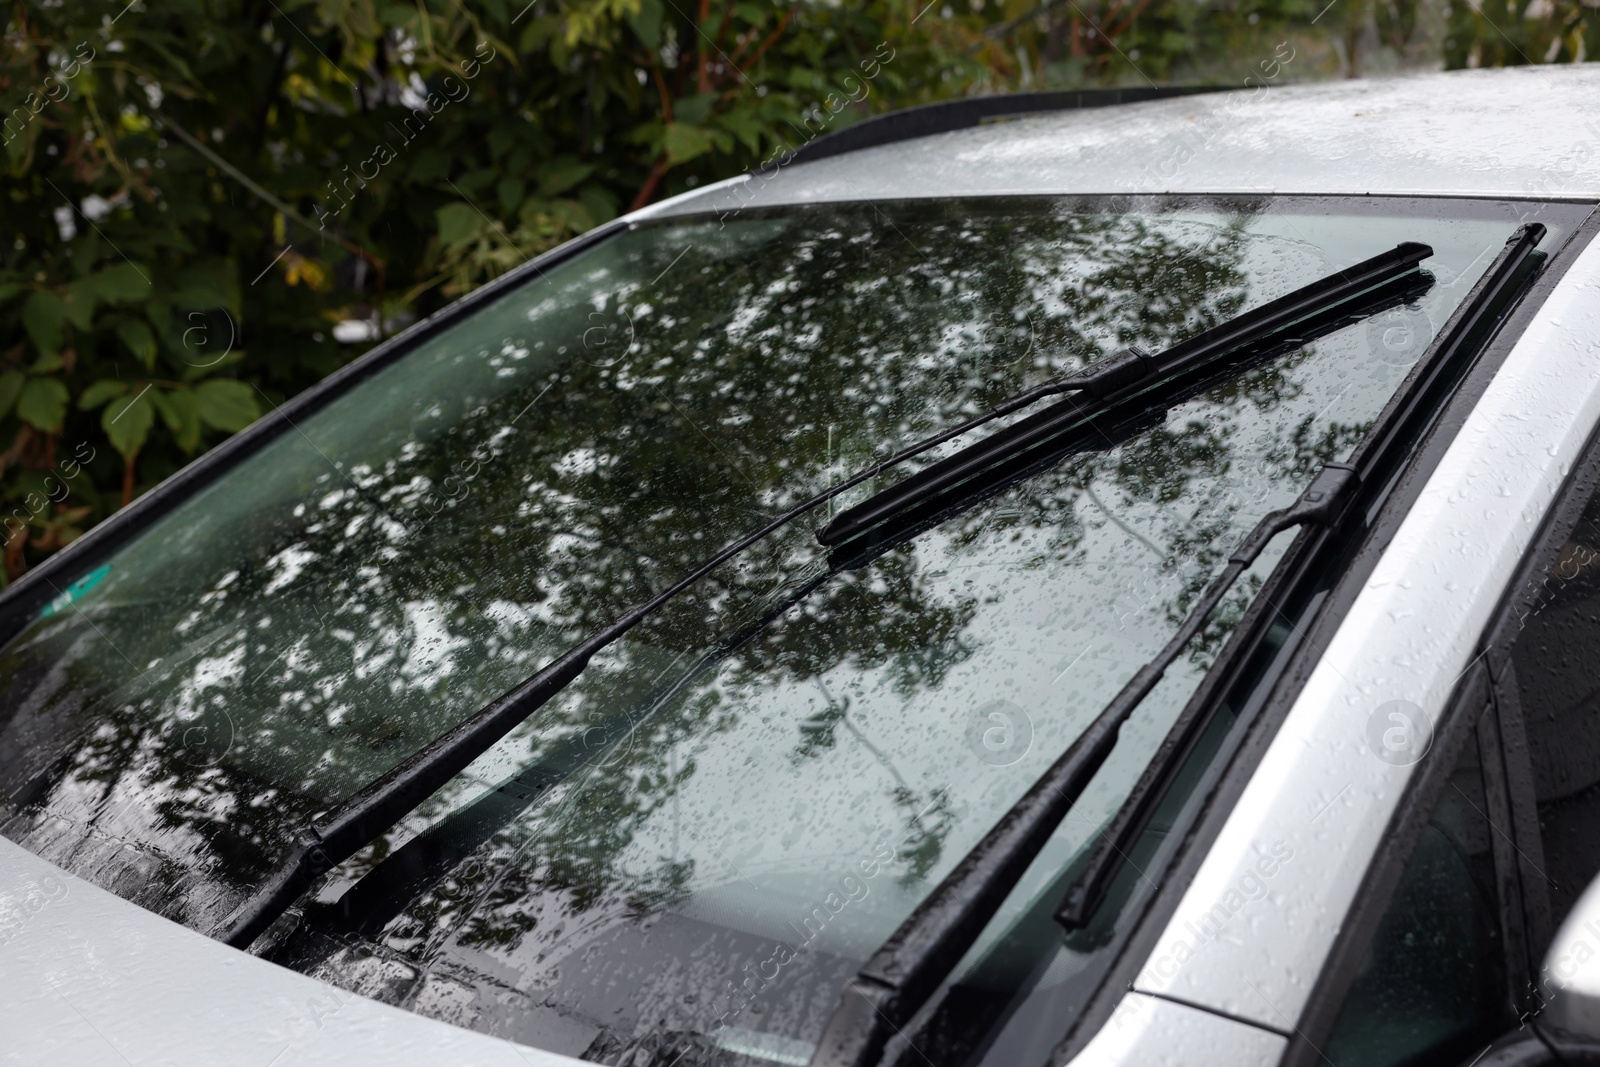 Photo of Wipers cleaning raindrops from car windshield outdoors